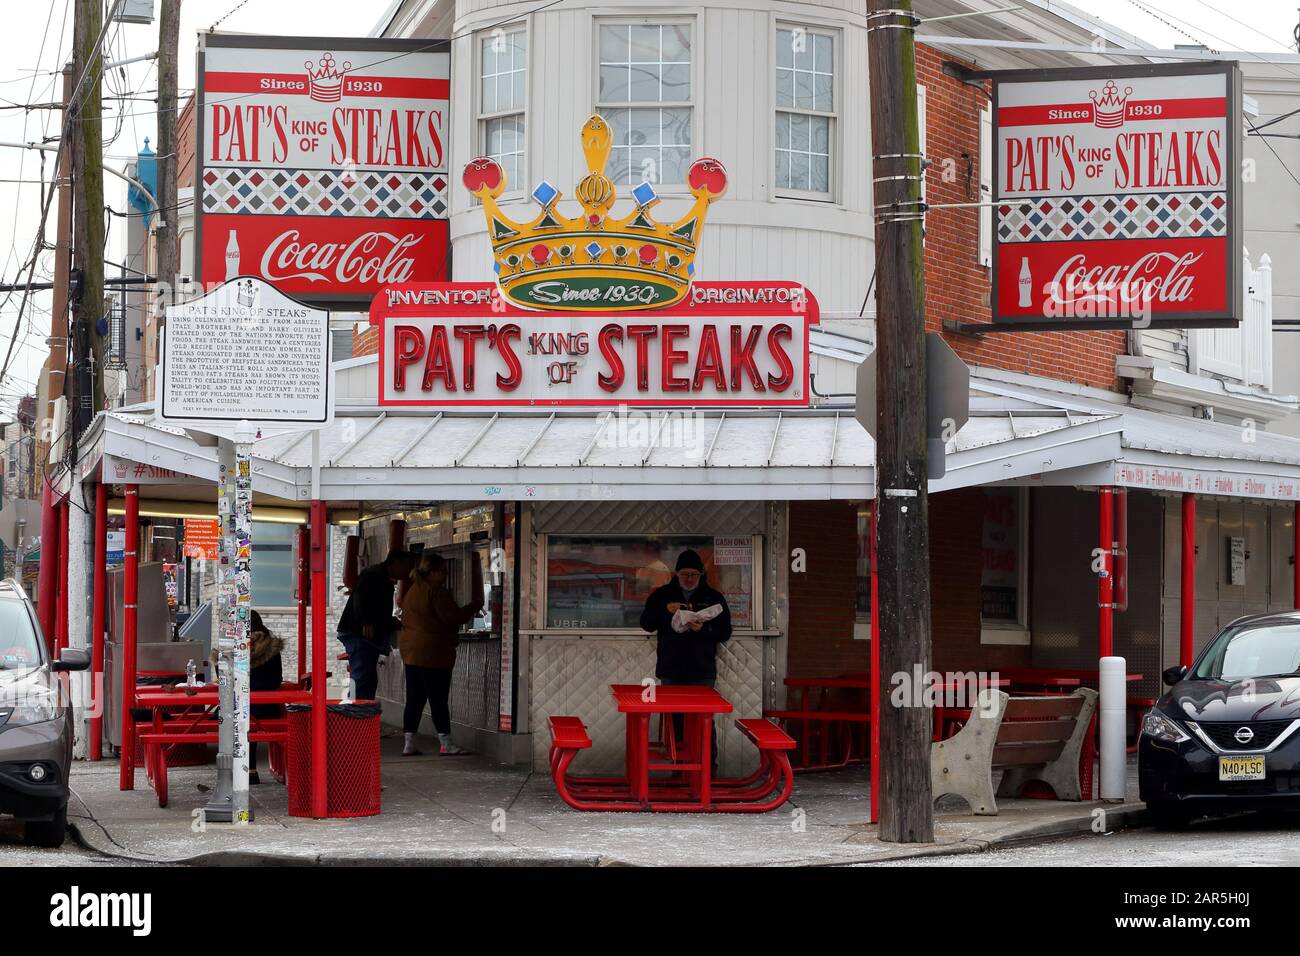 Pat's King of Steaks, 1237 E Passyunk Ave, Philadelphia, PA. exterior storefront of a cheesesteak eatery in Passyunk Square. Stock Photo